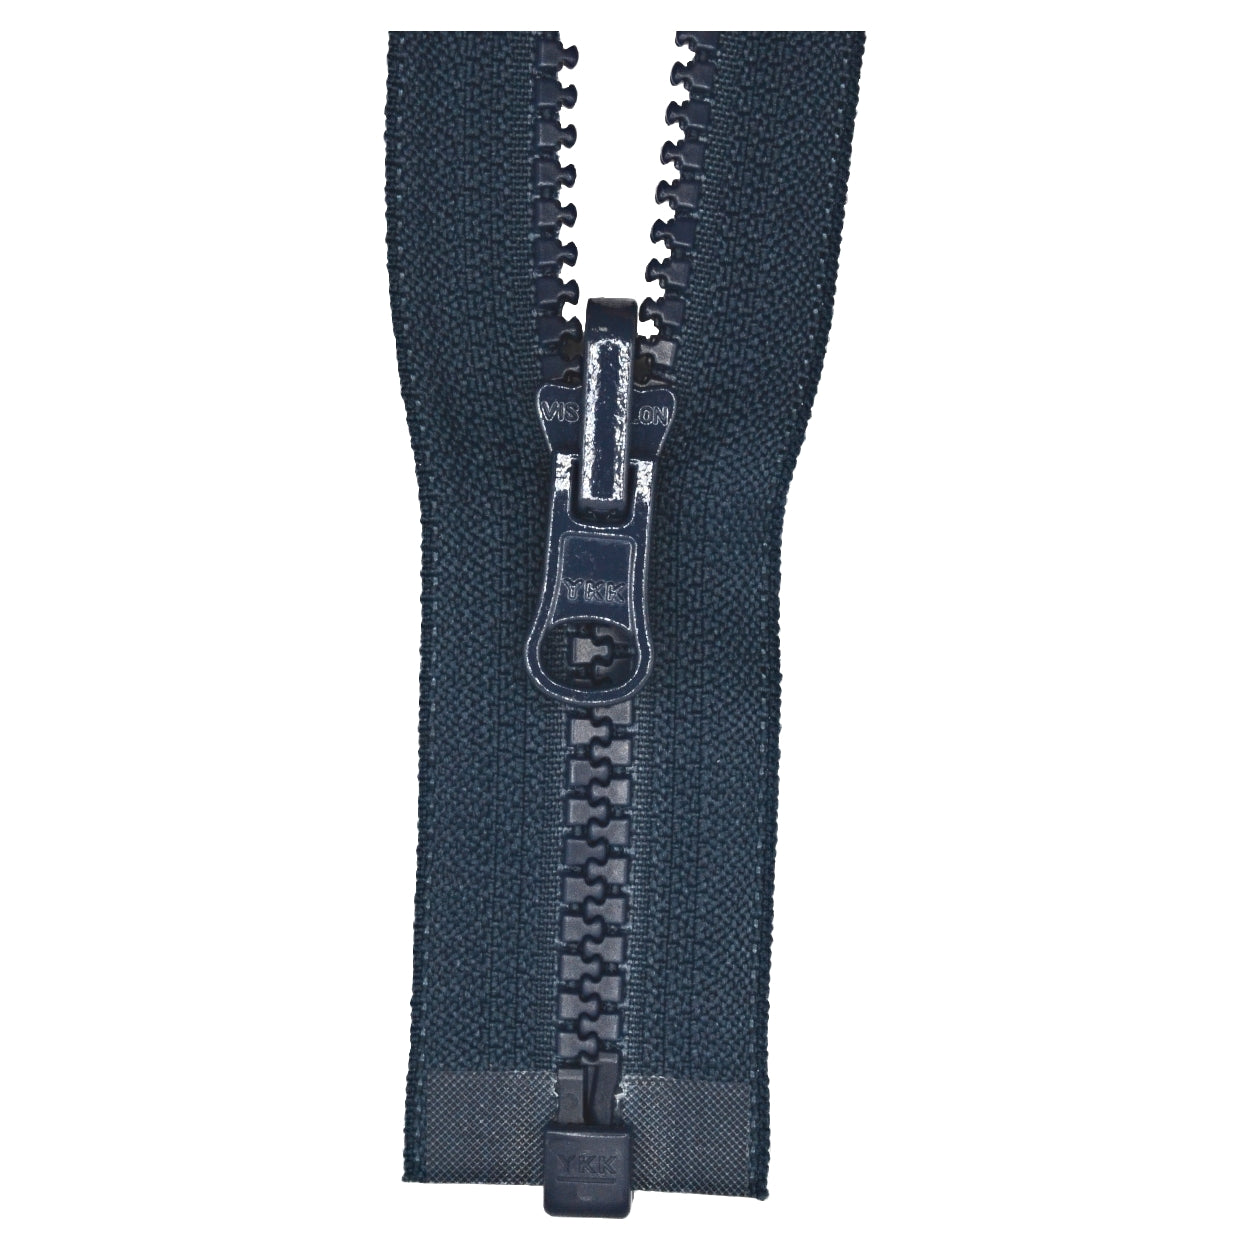 YKK Reversible Open End Zip NAVY from Jaycotts Sewing Supplies